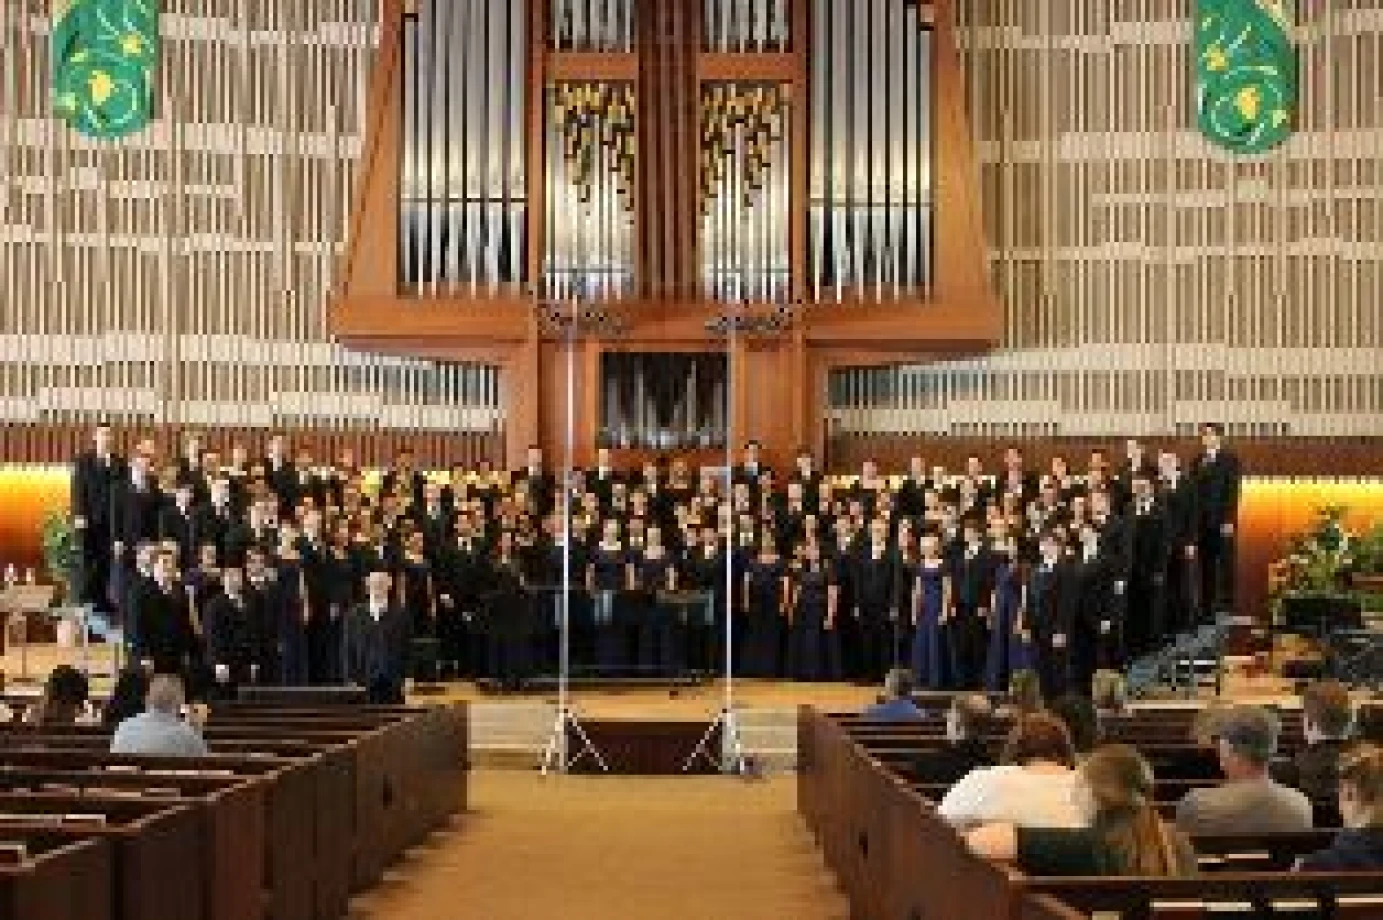 Californian School Choir will give free concert in St Anne’s